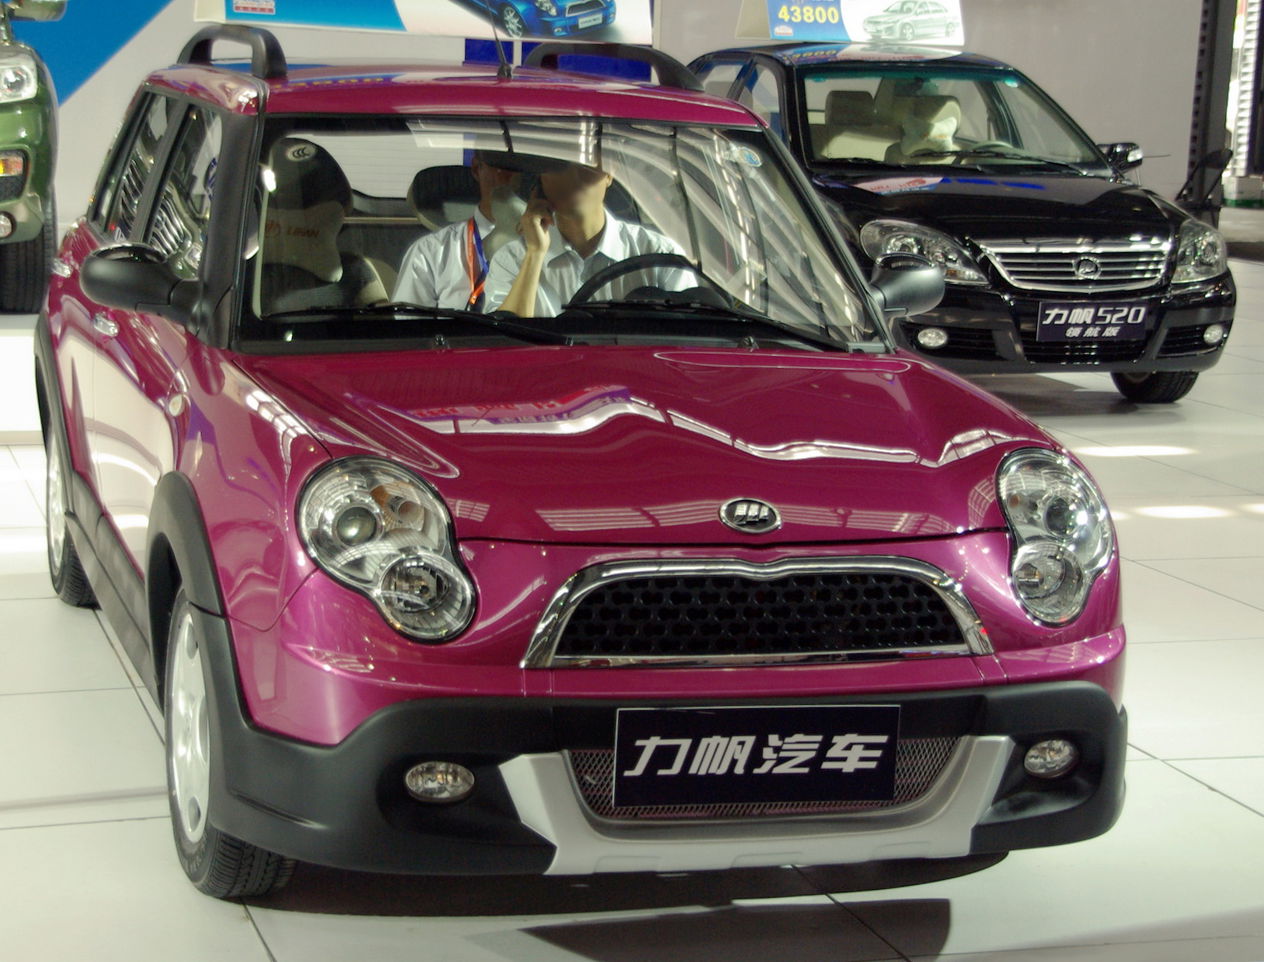 Most affordable cars made in China, Lifan_320_facelift Graeme Bray via Wikimedia.